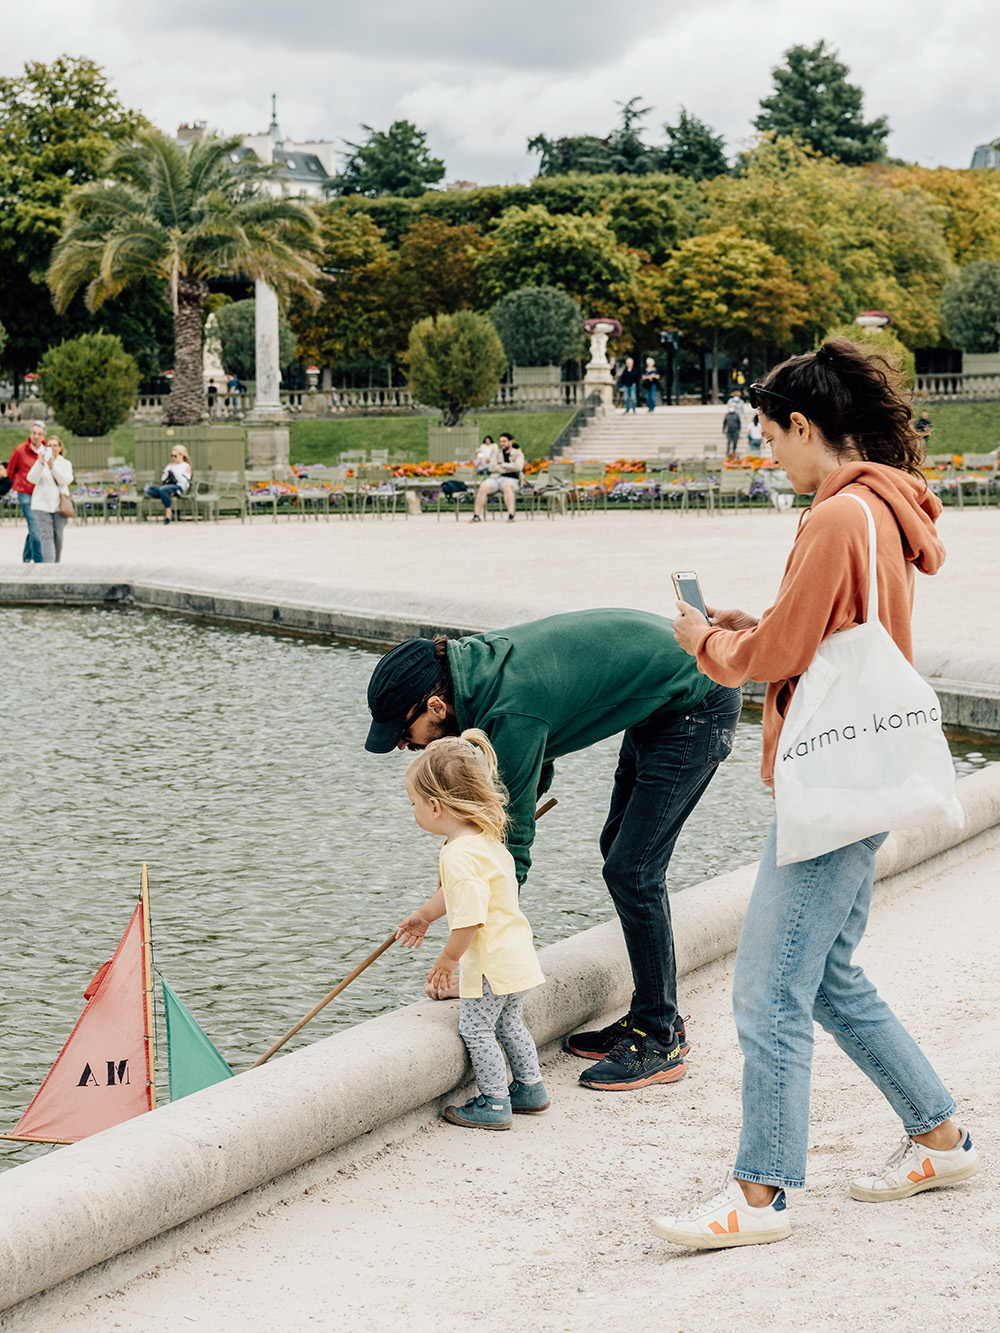 Paris with kids: best things to do